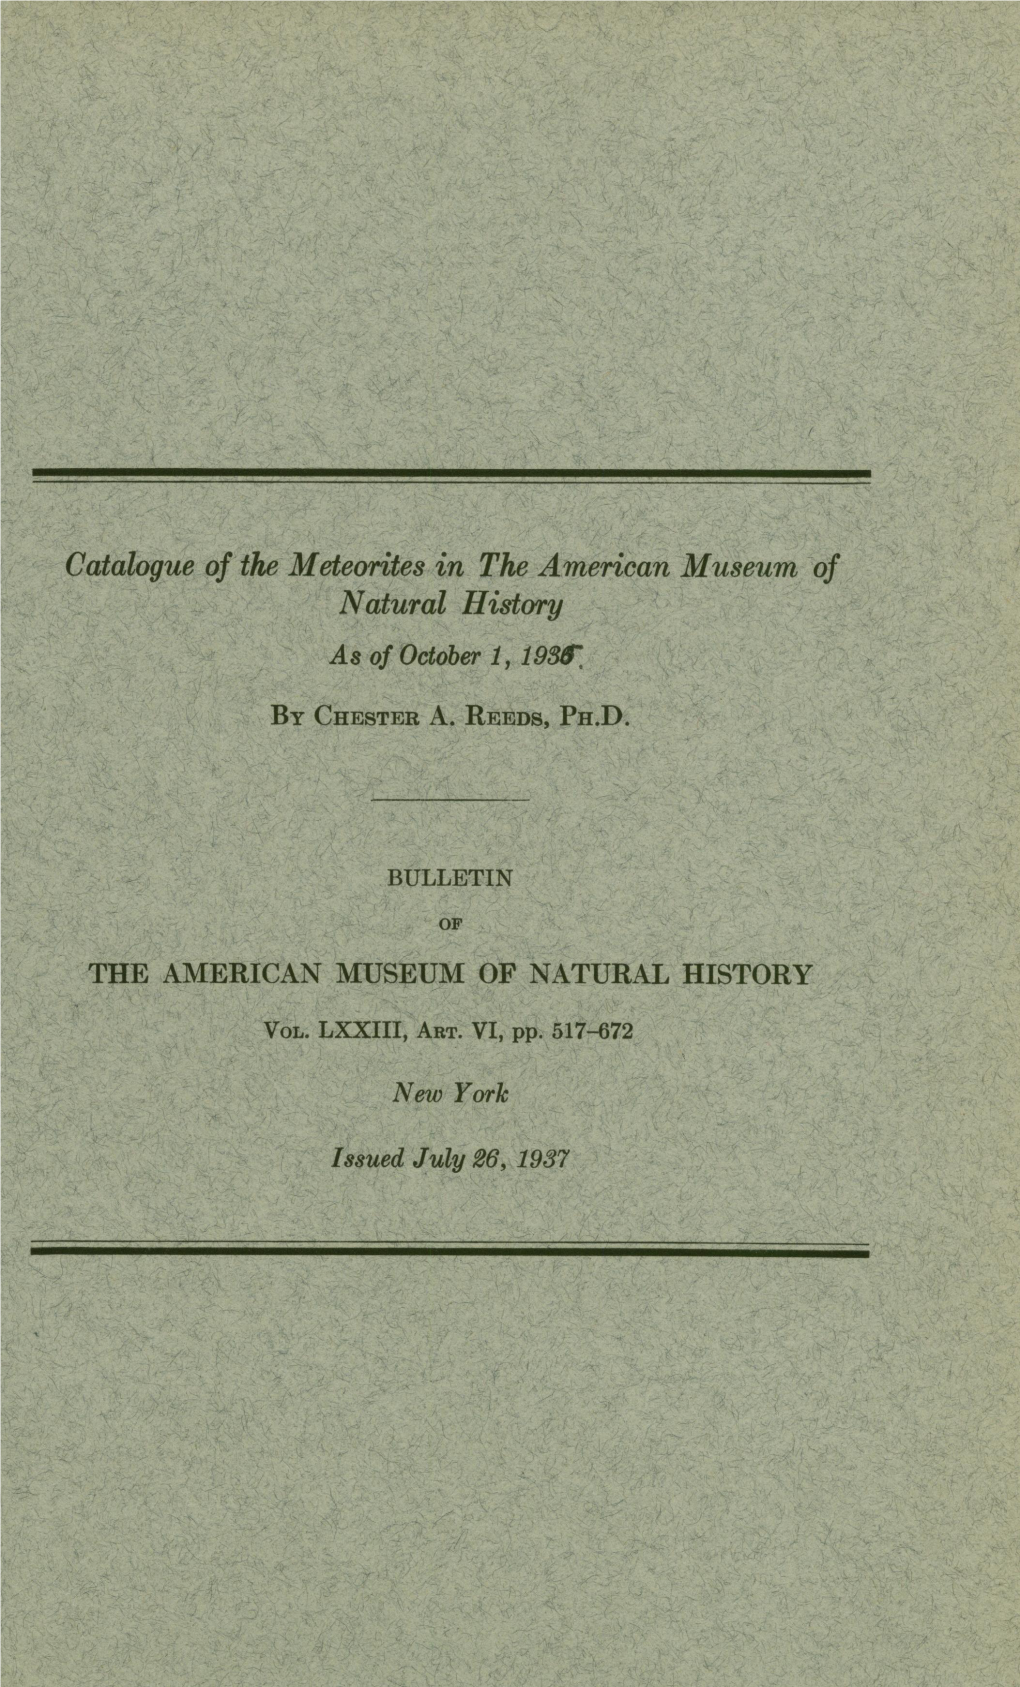 Catalogue of the Meteorit in the American Museum of Natural History As of October 1, 19W